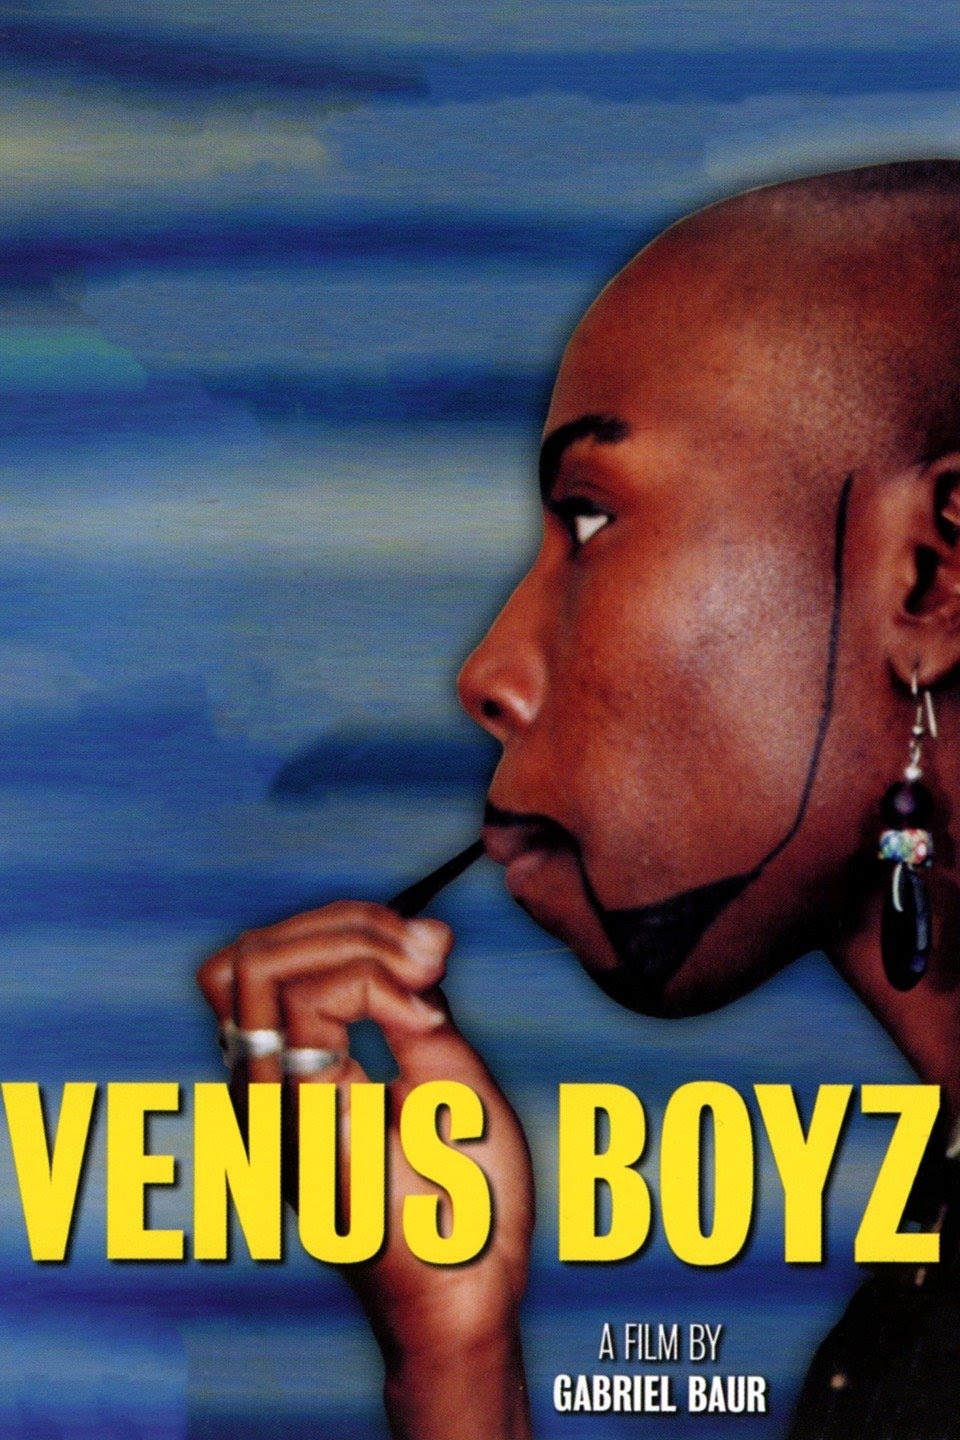 A drag king painting on his beard in a movie poster for Venus Boyz